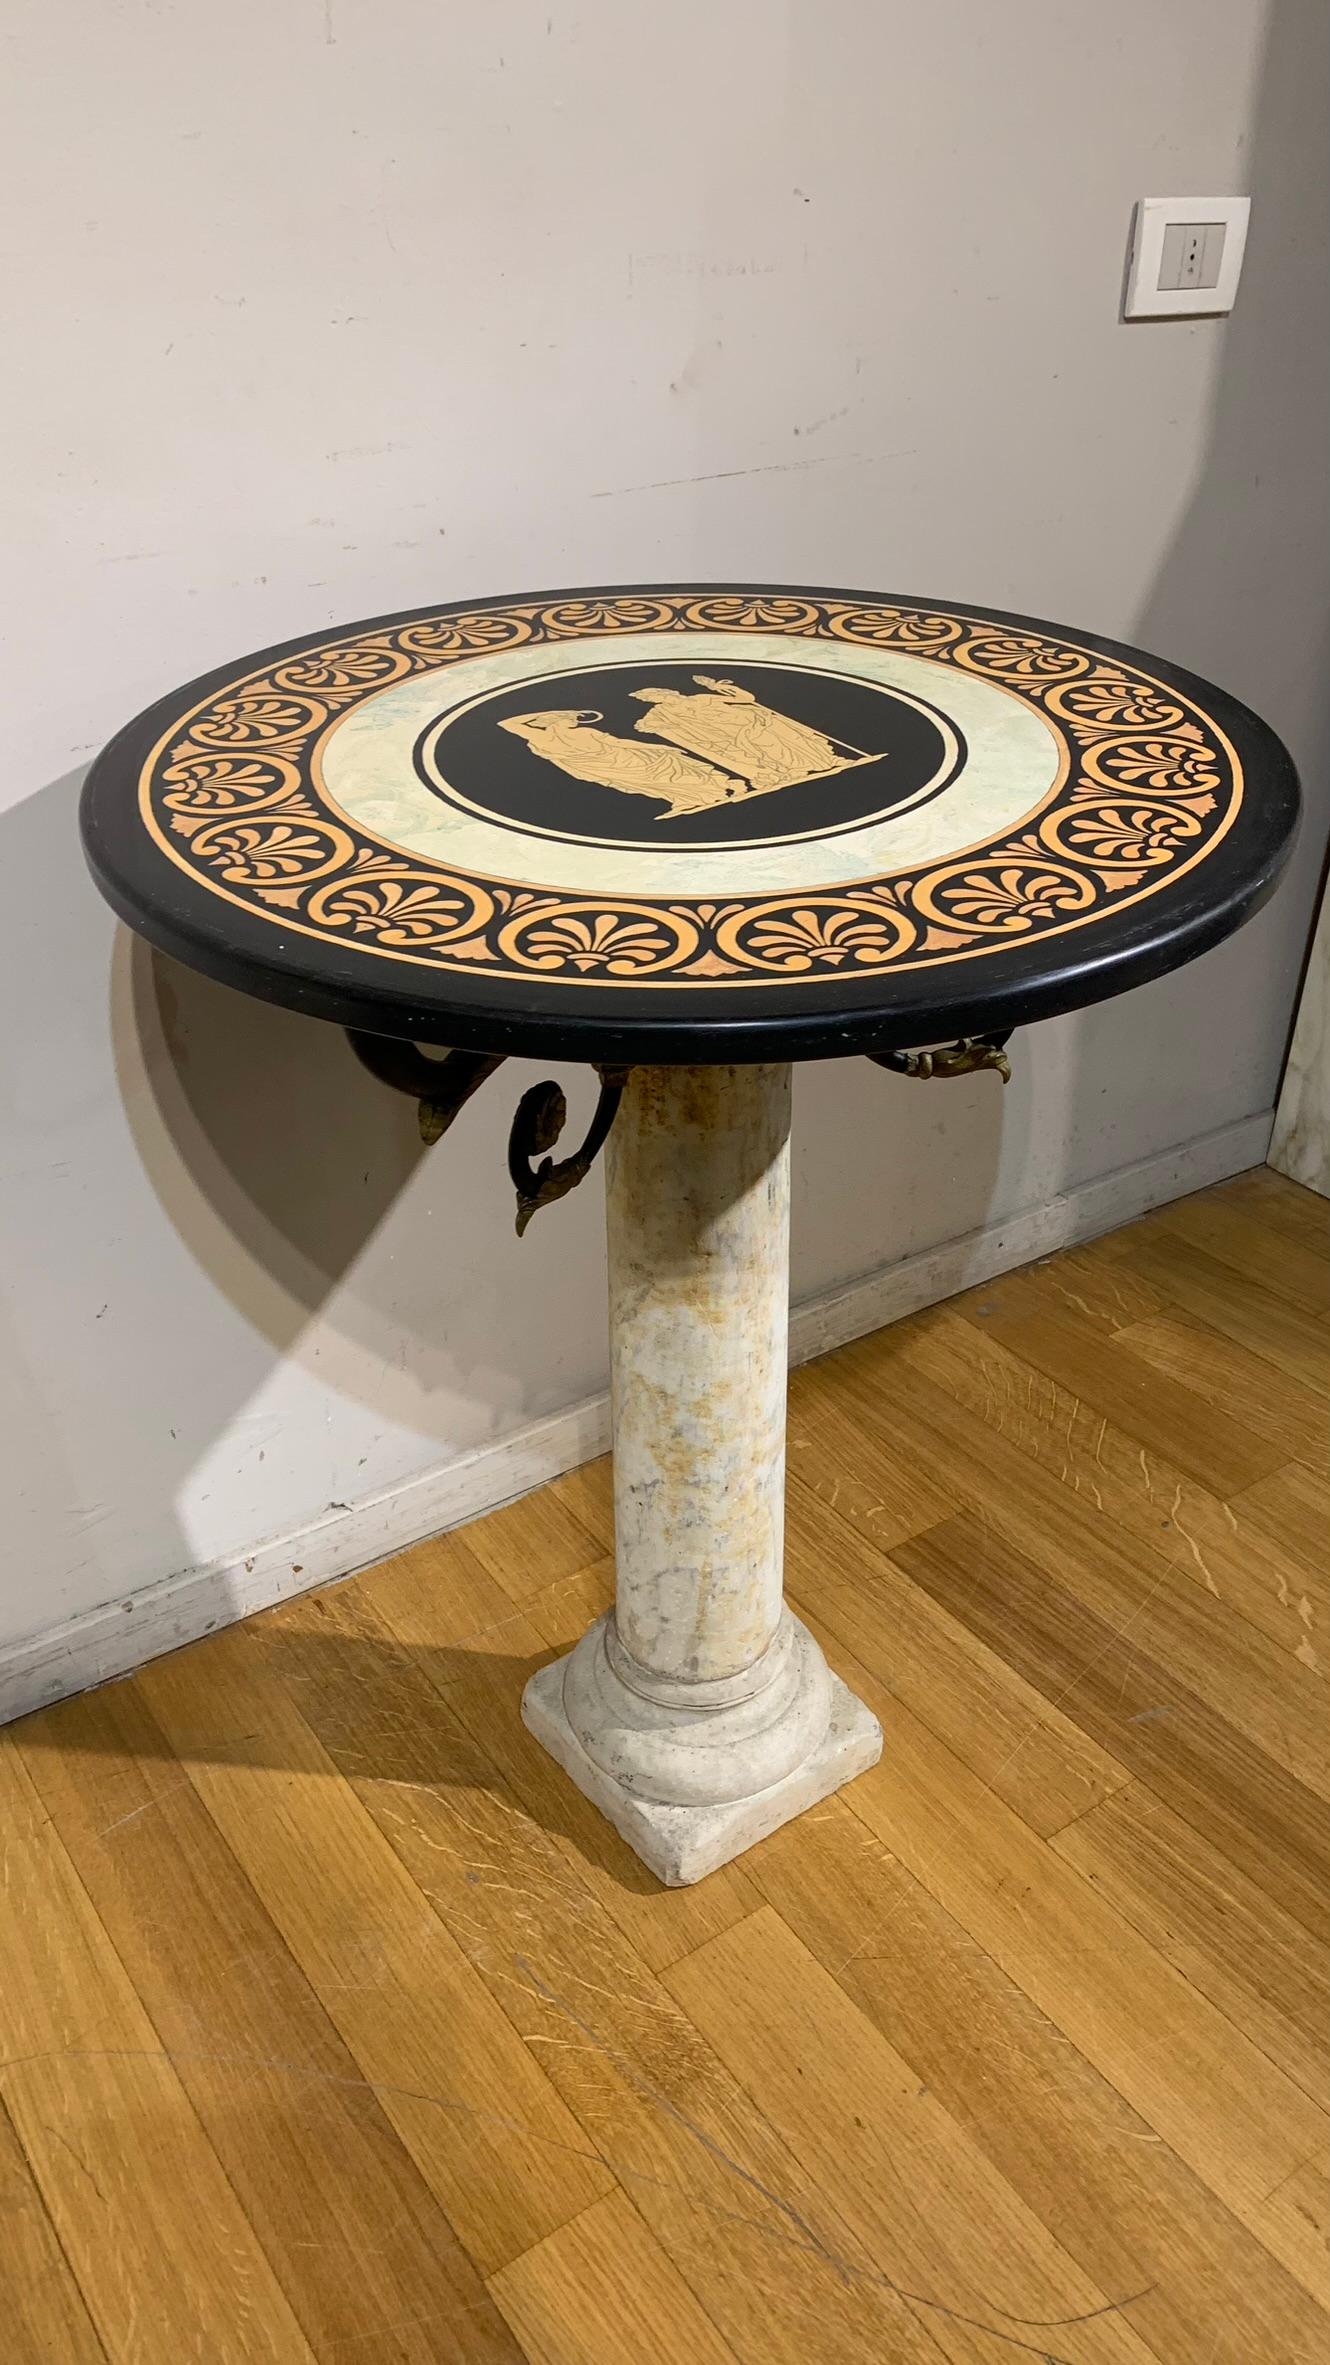 Late 19th Century Neoclassical Small Round Table in Carrara Marble and Scagliola For Sale 7